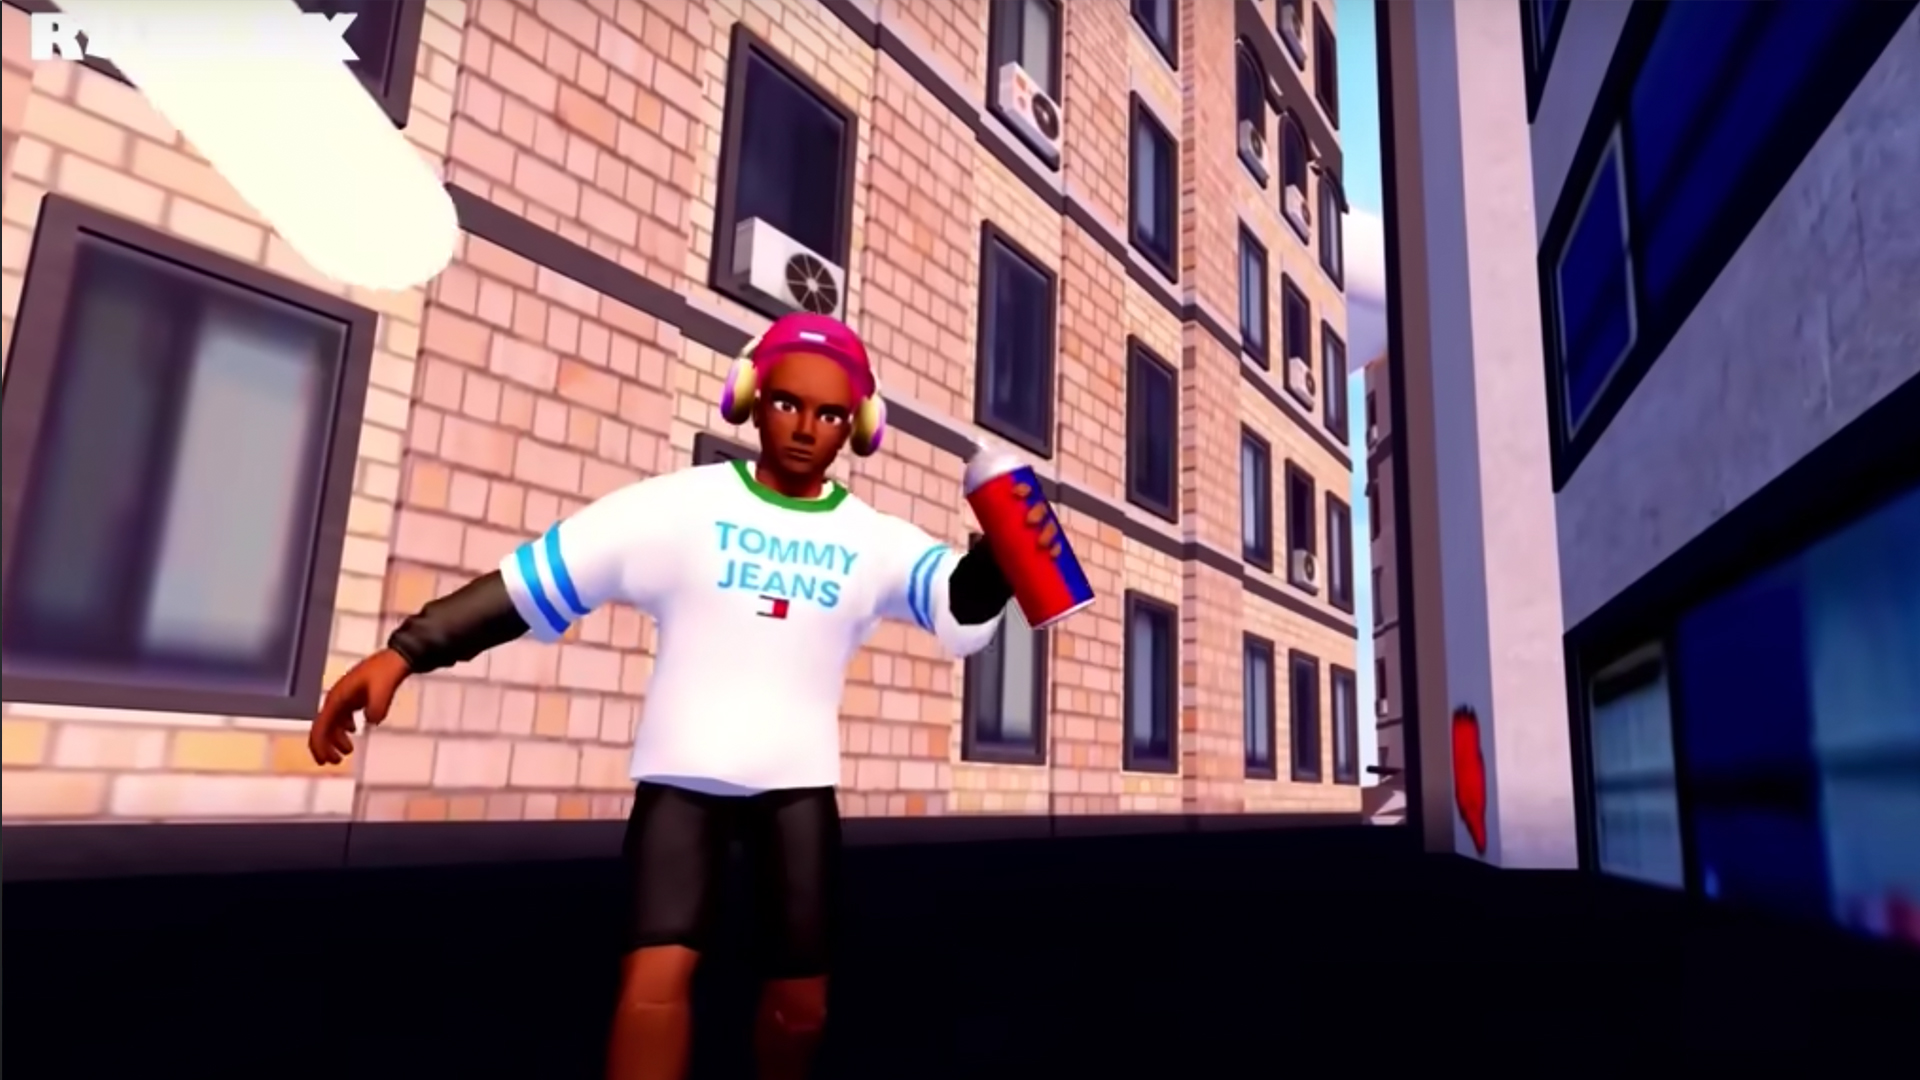 Roblox fashion expands even further with in-game Tommy Hilfiger shop